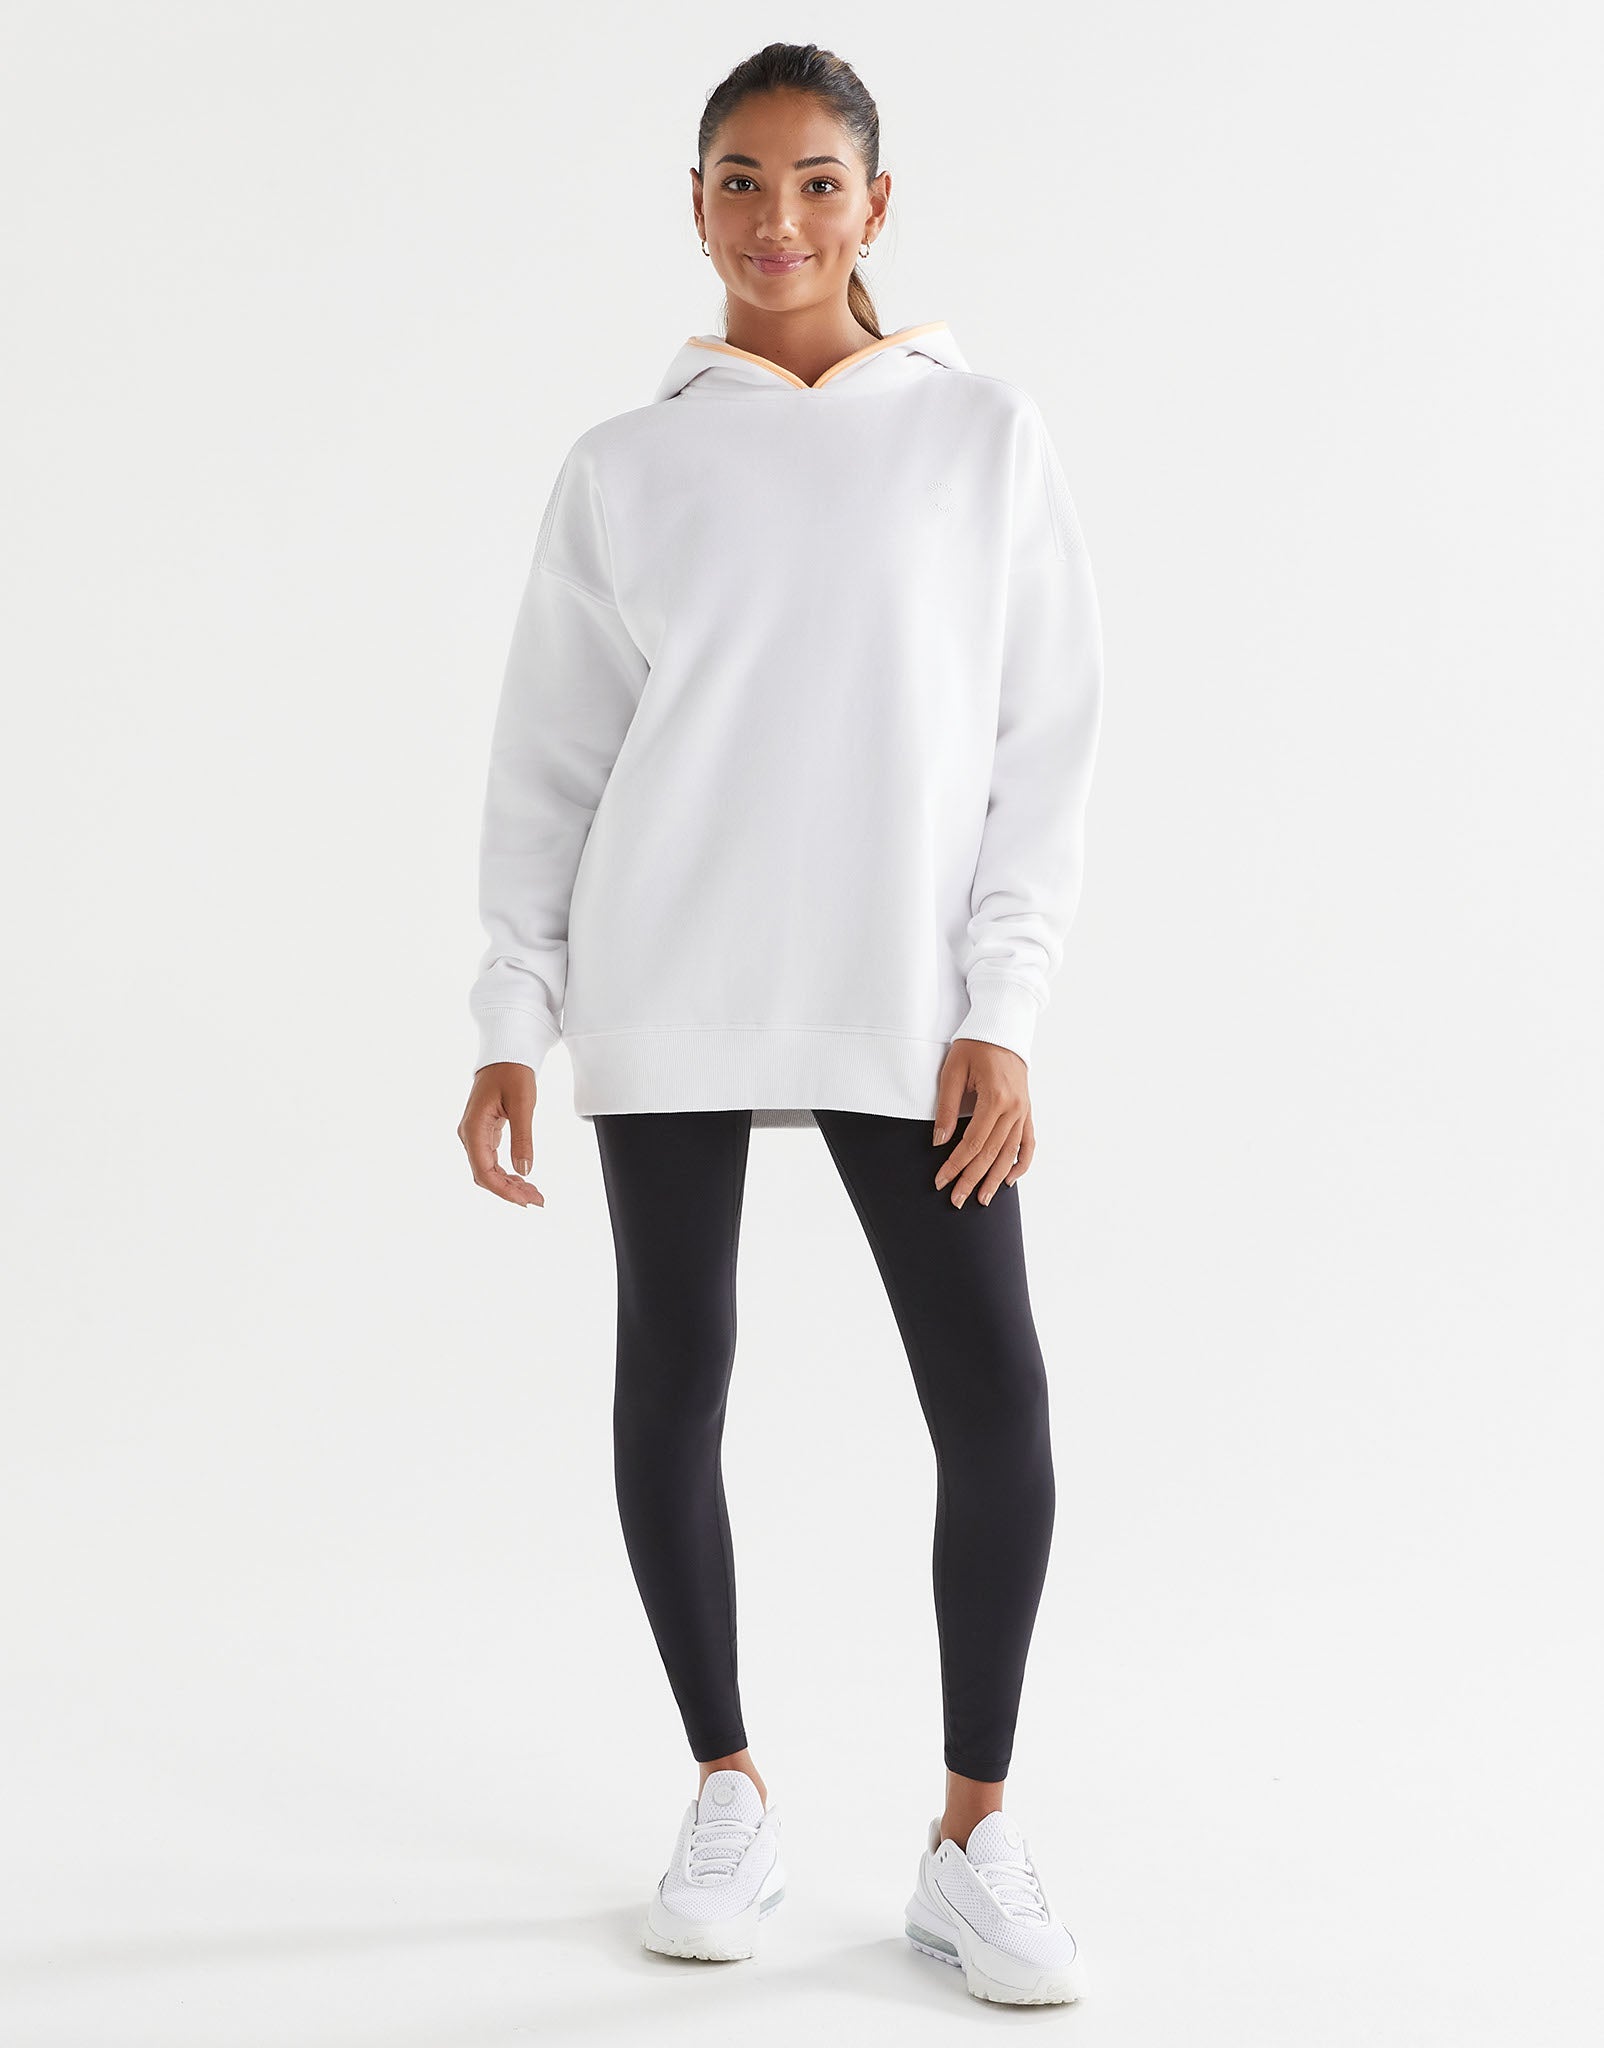 Lilybod-Lucy-Hooded-Sweat-White-LT68-C22-WT-1.jpeg